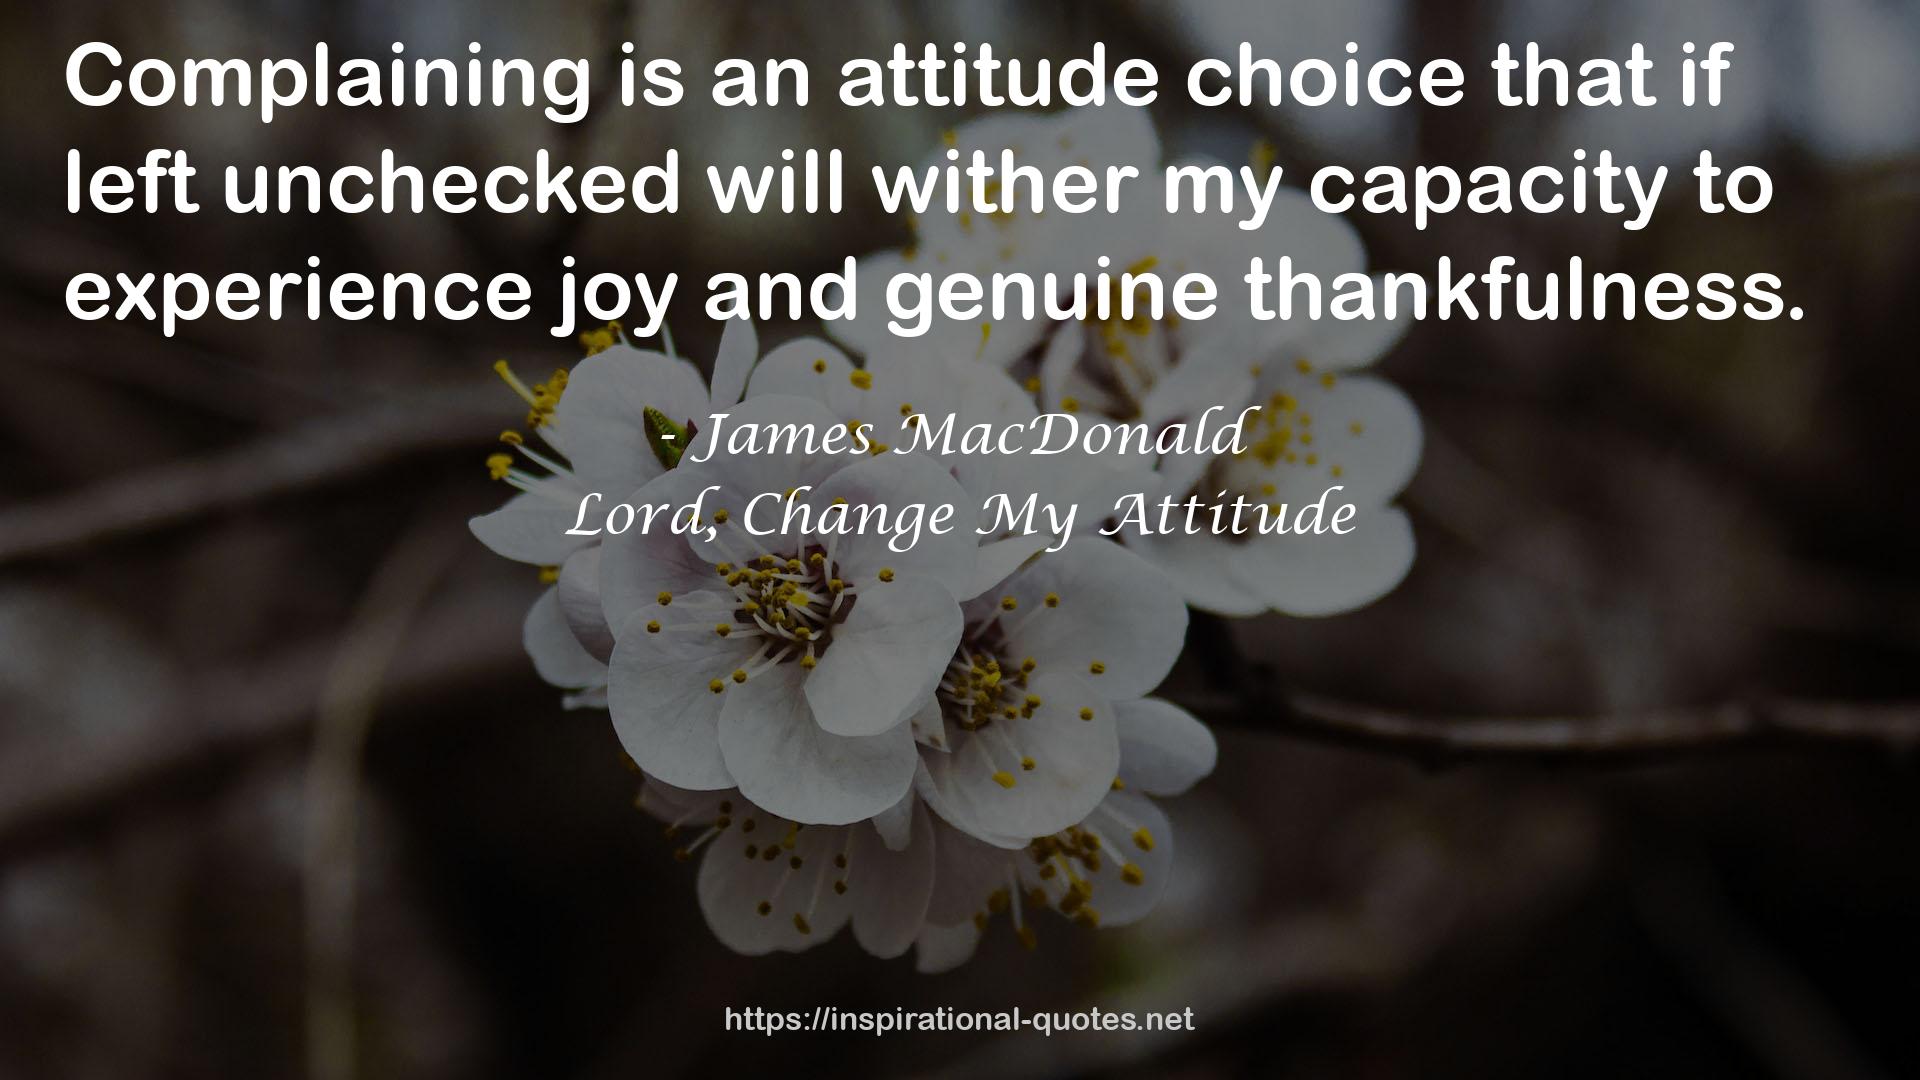 Lord, Change My Attitude QUOTES